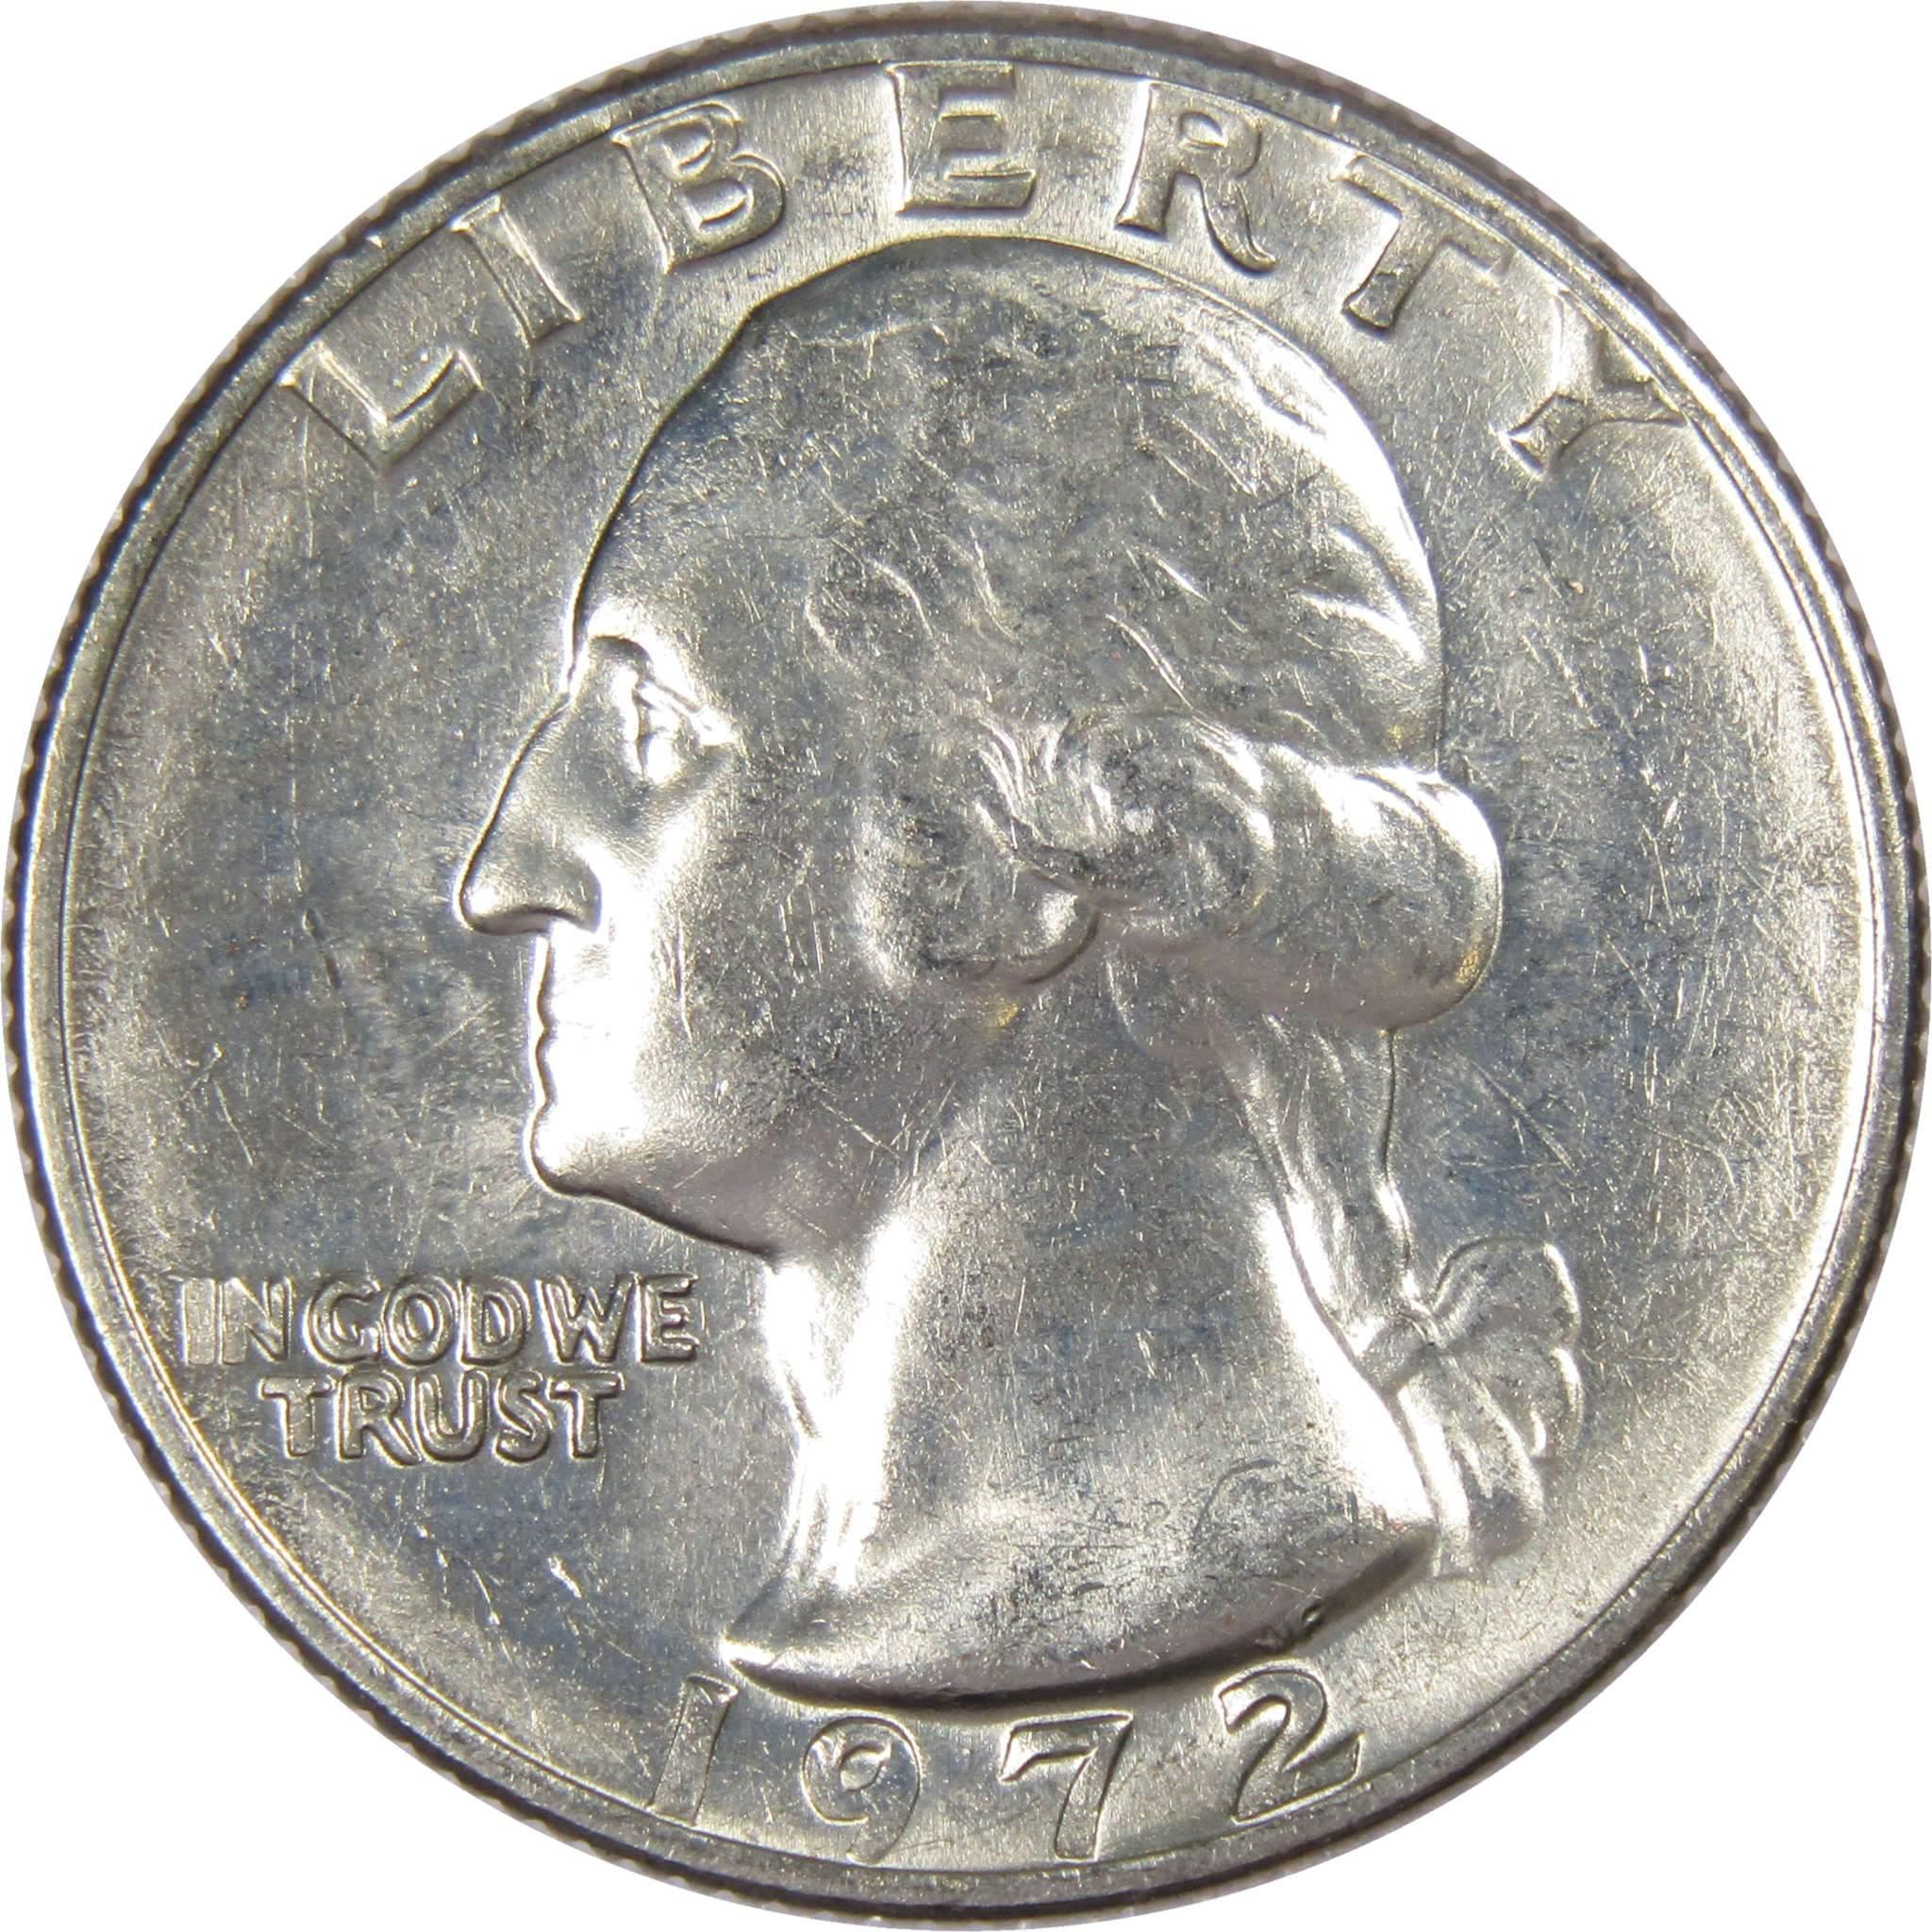 1972 Washington Quarter BU Uncirculated Mint State 25c US Coin Collectible